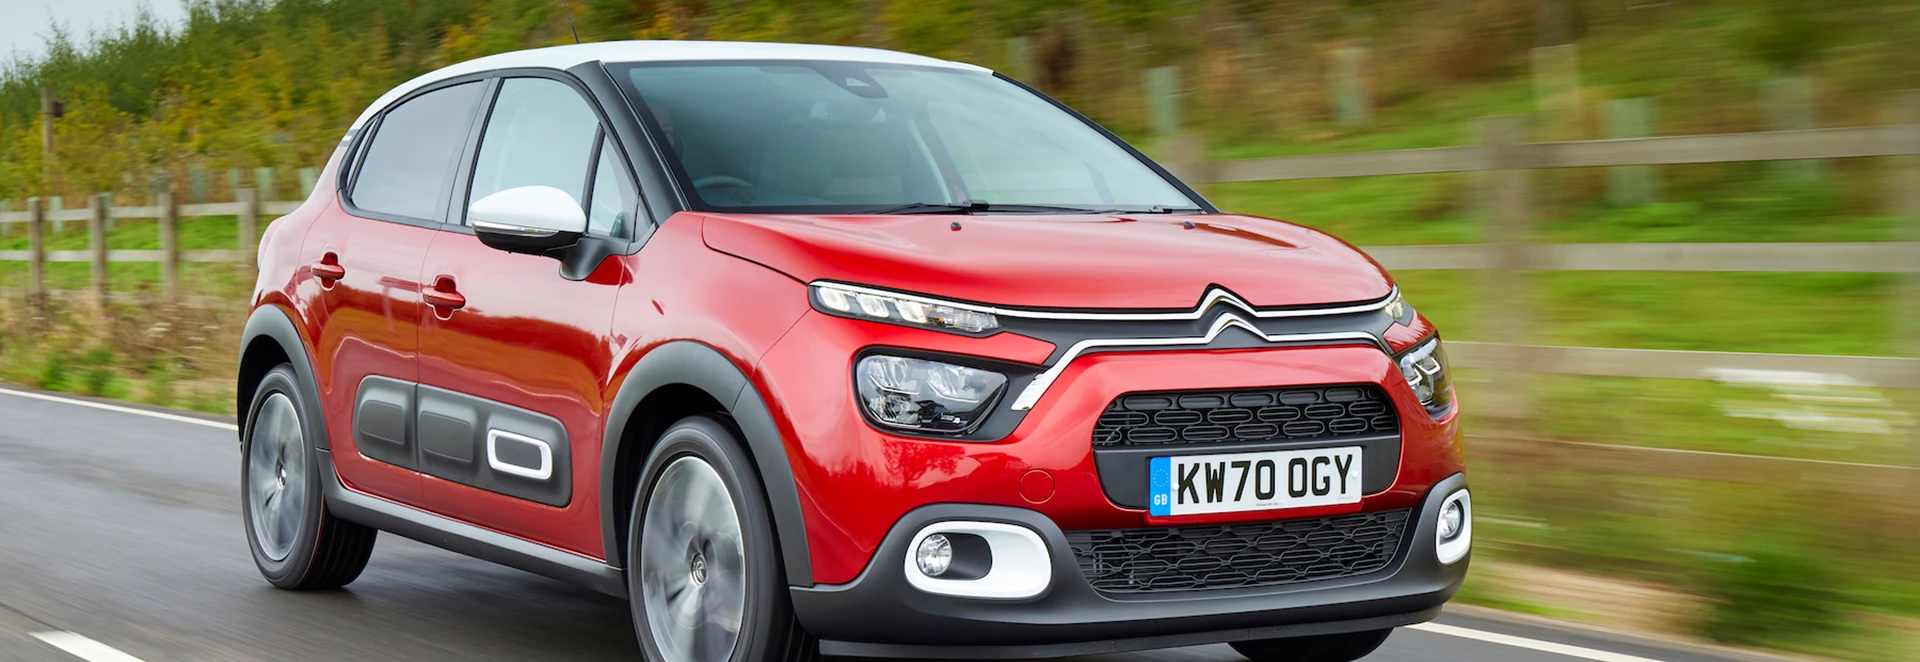 Buyer’s guide to the Citroen C3 